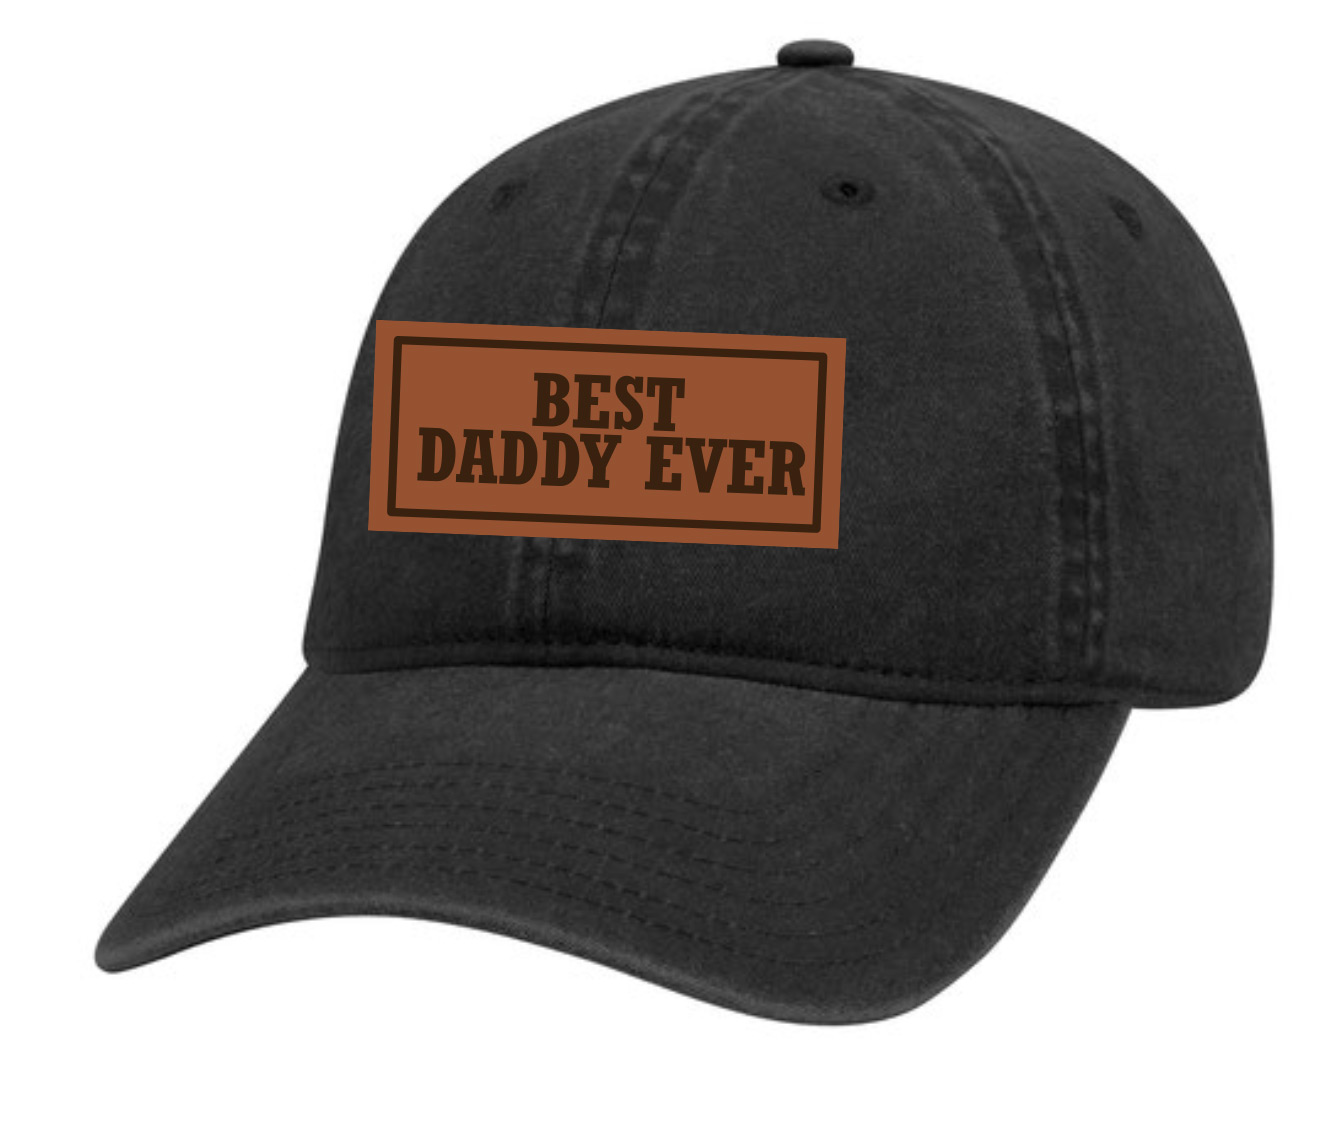 Leather daddy hat